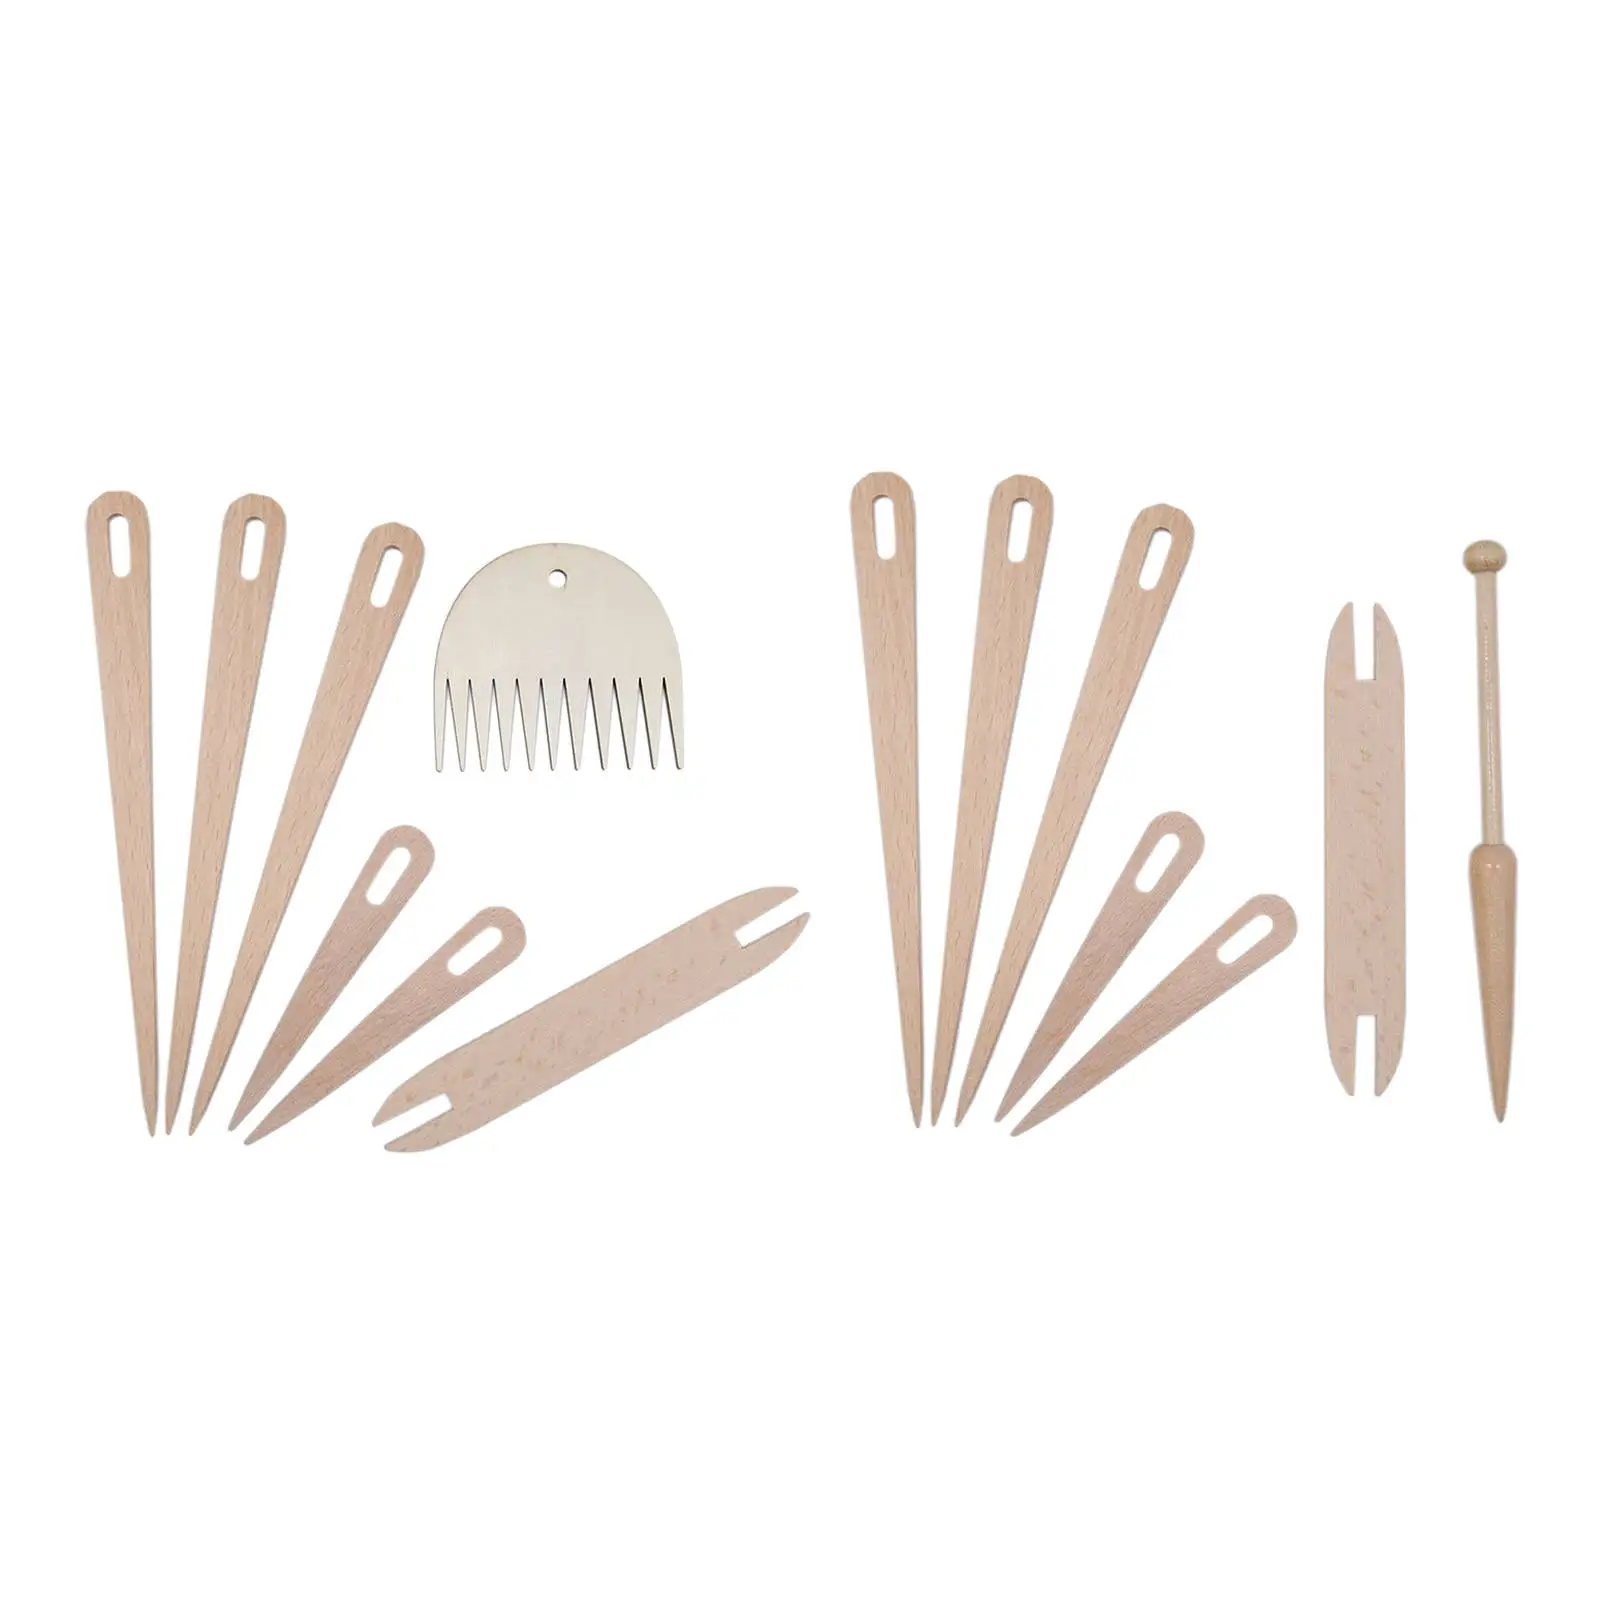 5PCS Wood Hand Loom Stick Tapestry Weaving Knit Handcrafts Tool Wooden Hooks Tapestry Loom Knitting Needle Stick